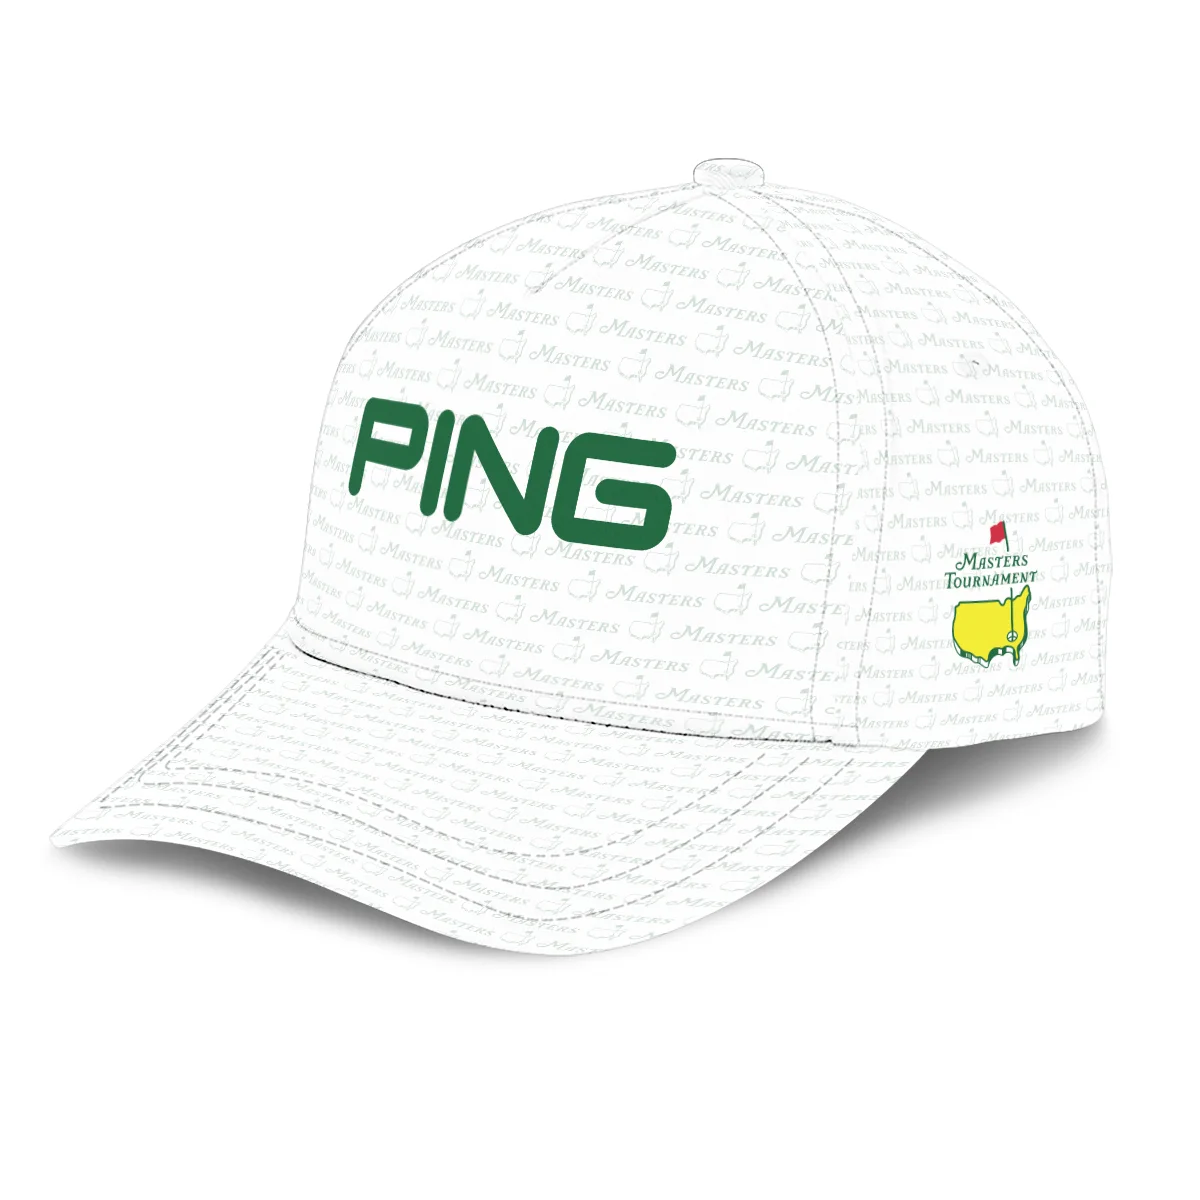 Golf Pattern Dark Green Ping Masters Tournament Style Classic Golf All over Print Cap